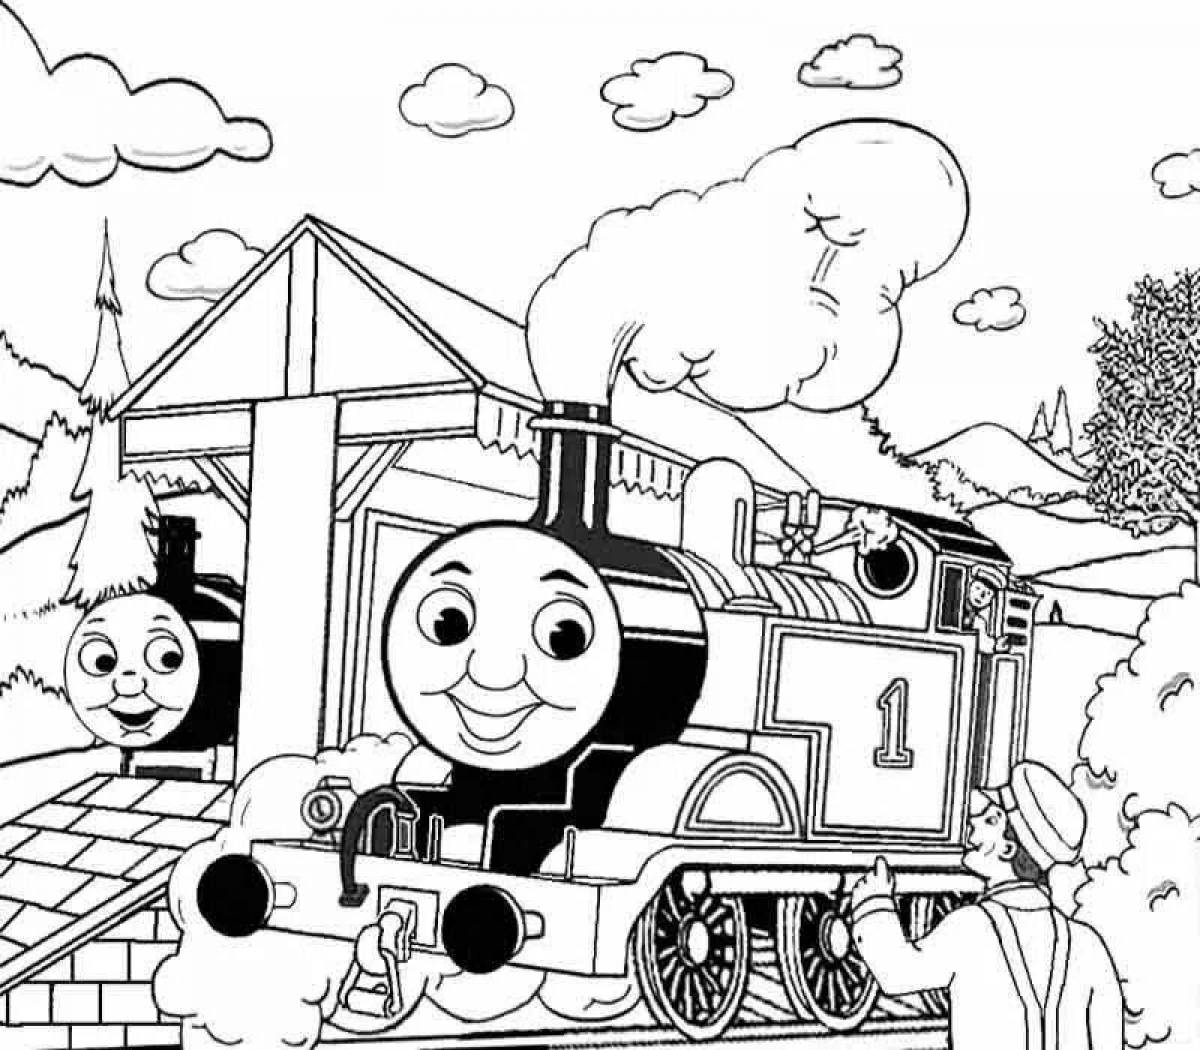 Thomas the Tank Engine humorous coloring page